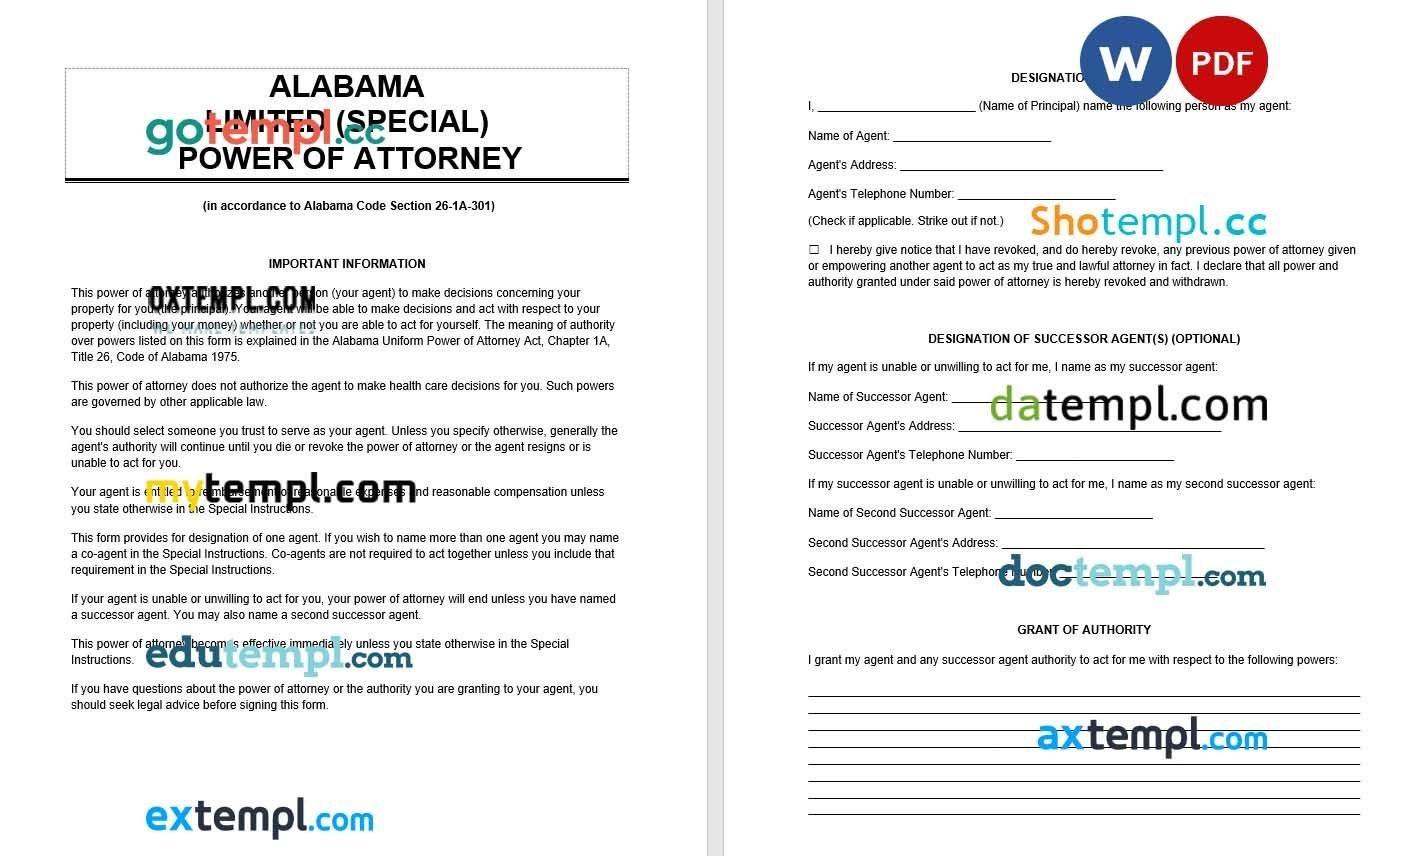 Alabama Limited Power of Attorney example, fully editable